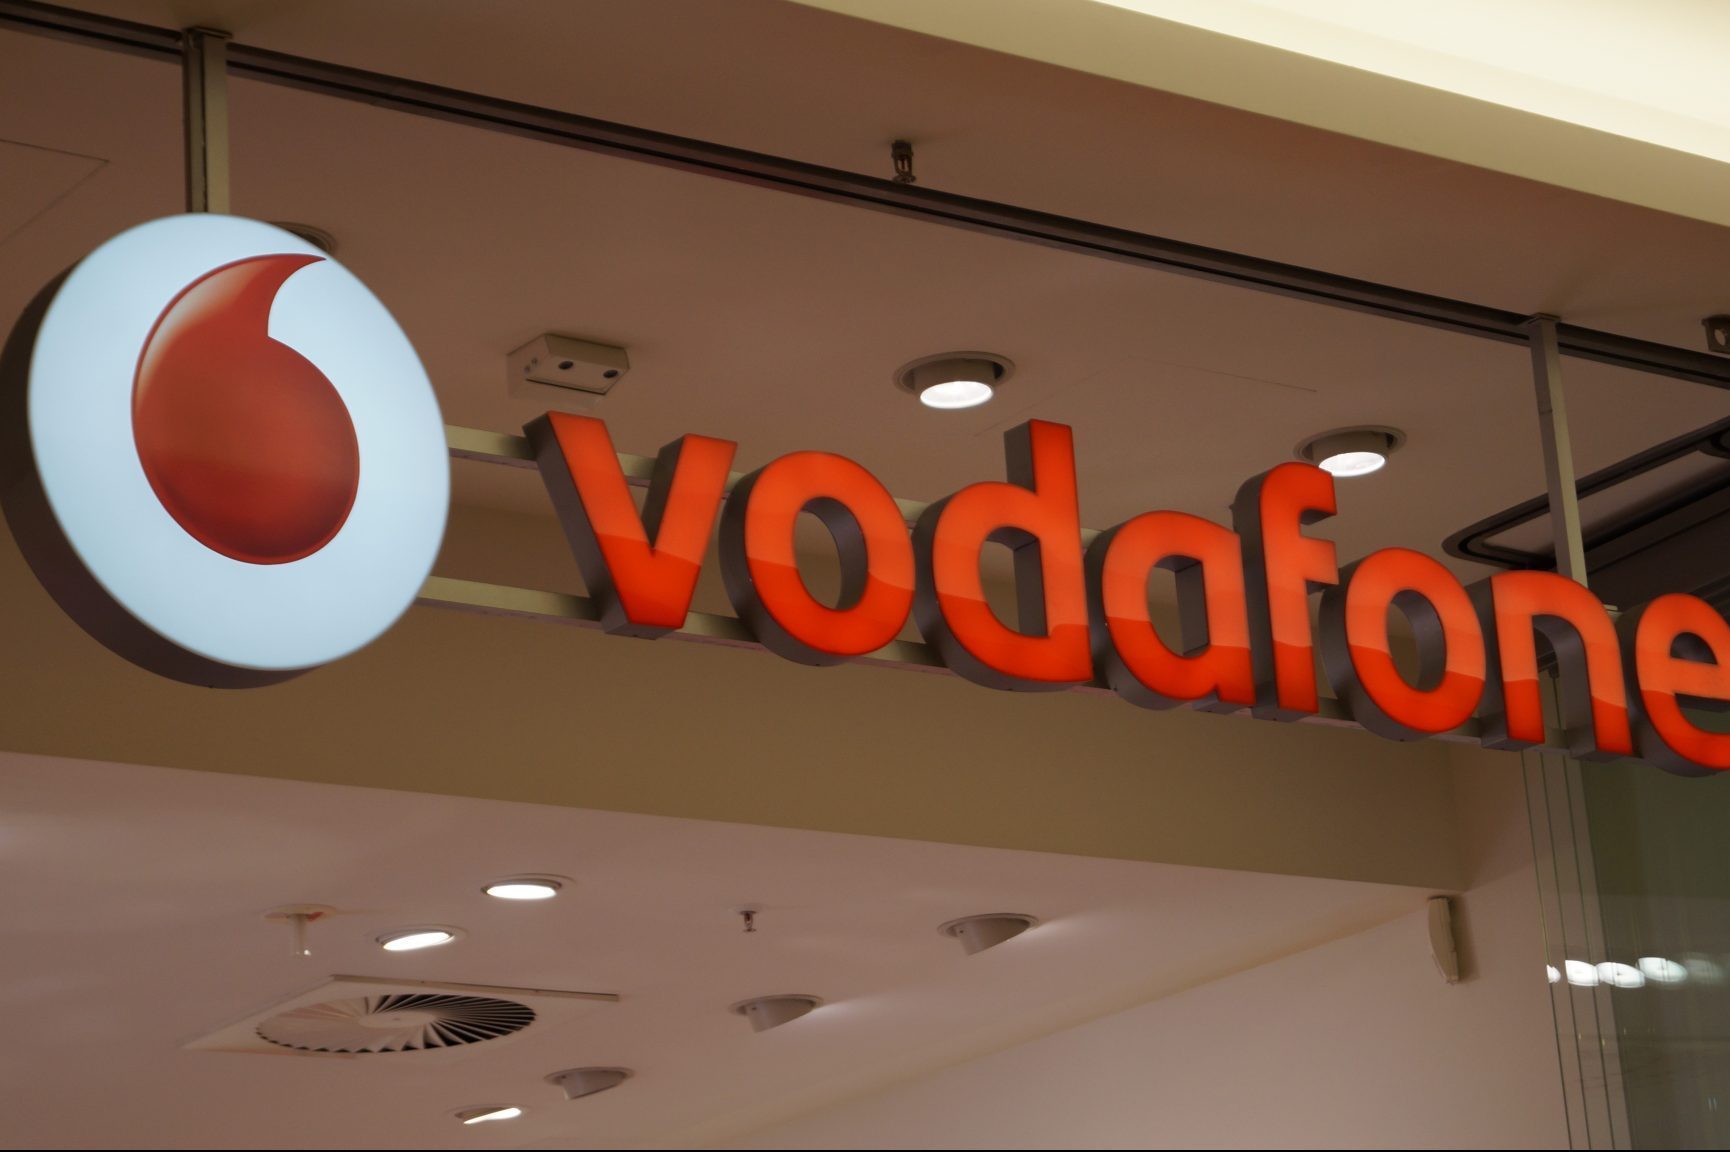 Vodafone store front sign